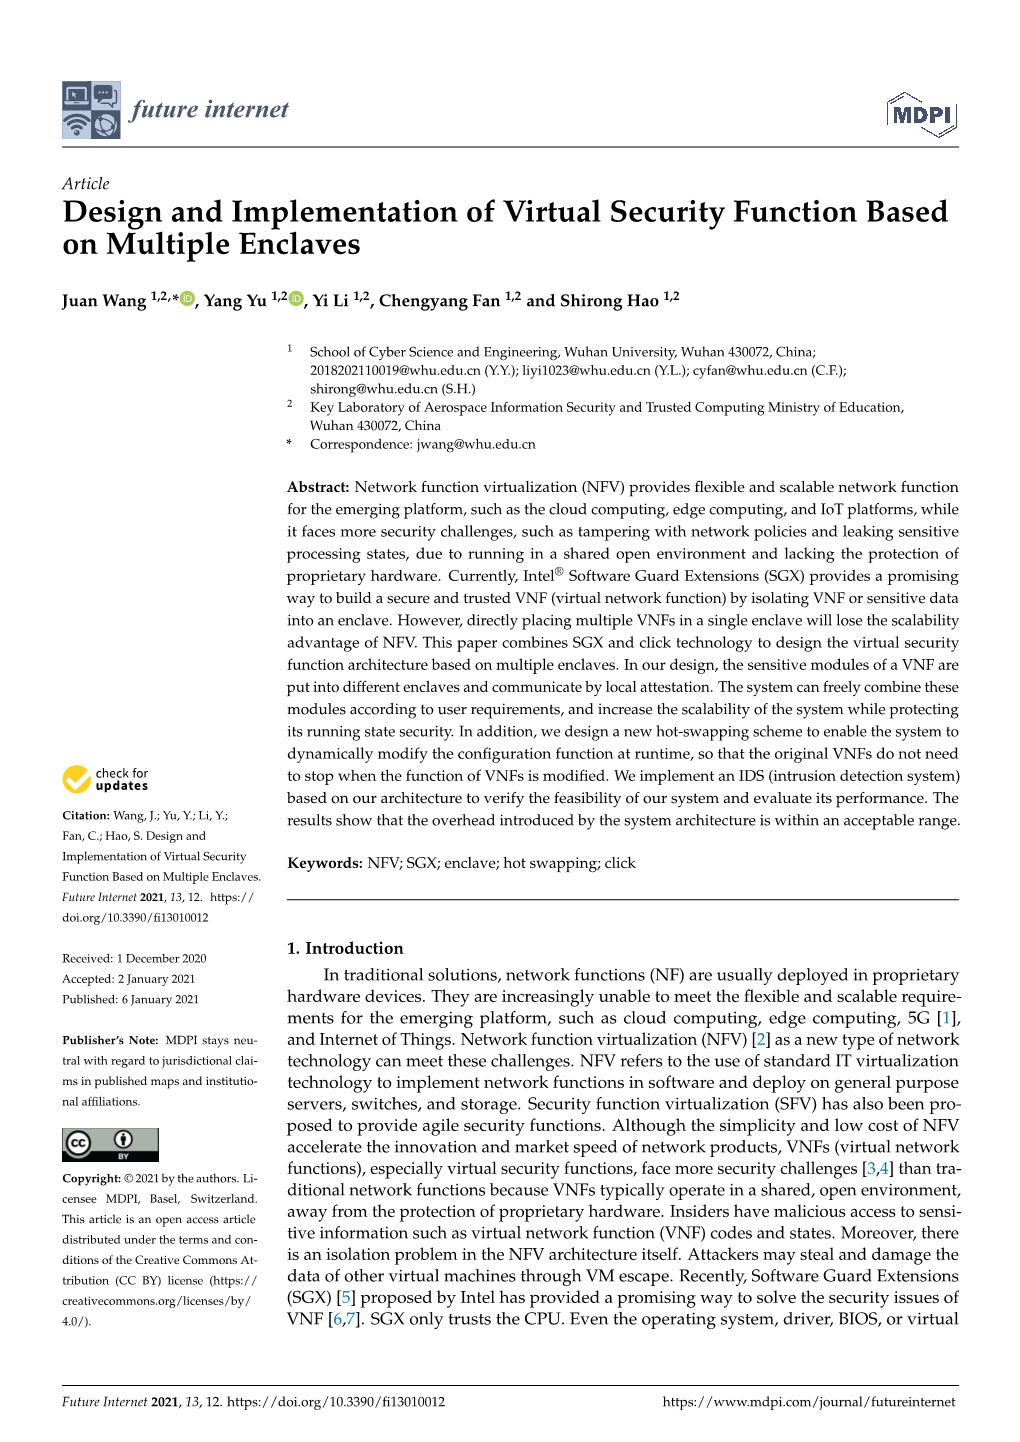 Design and Implementation of Virtual Security Function Based on Multiple Enclaves